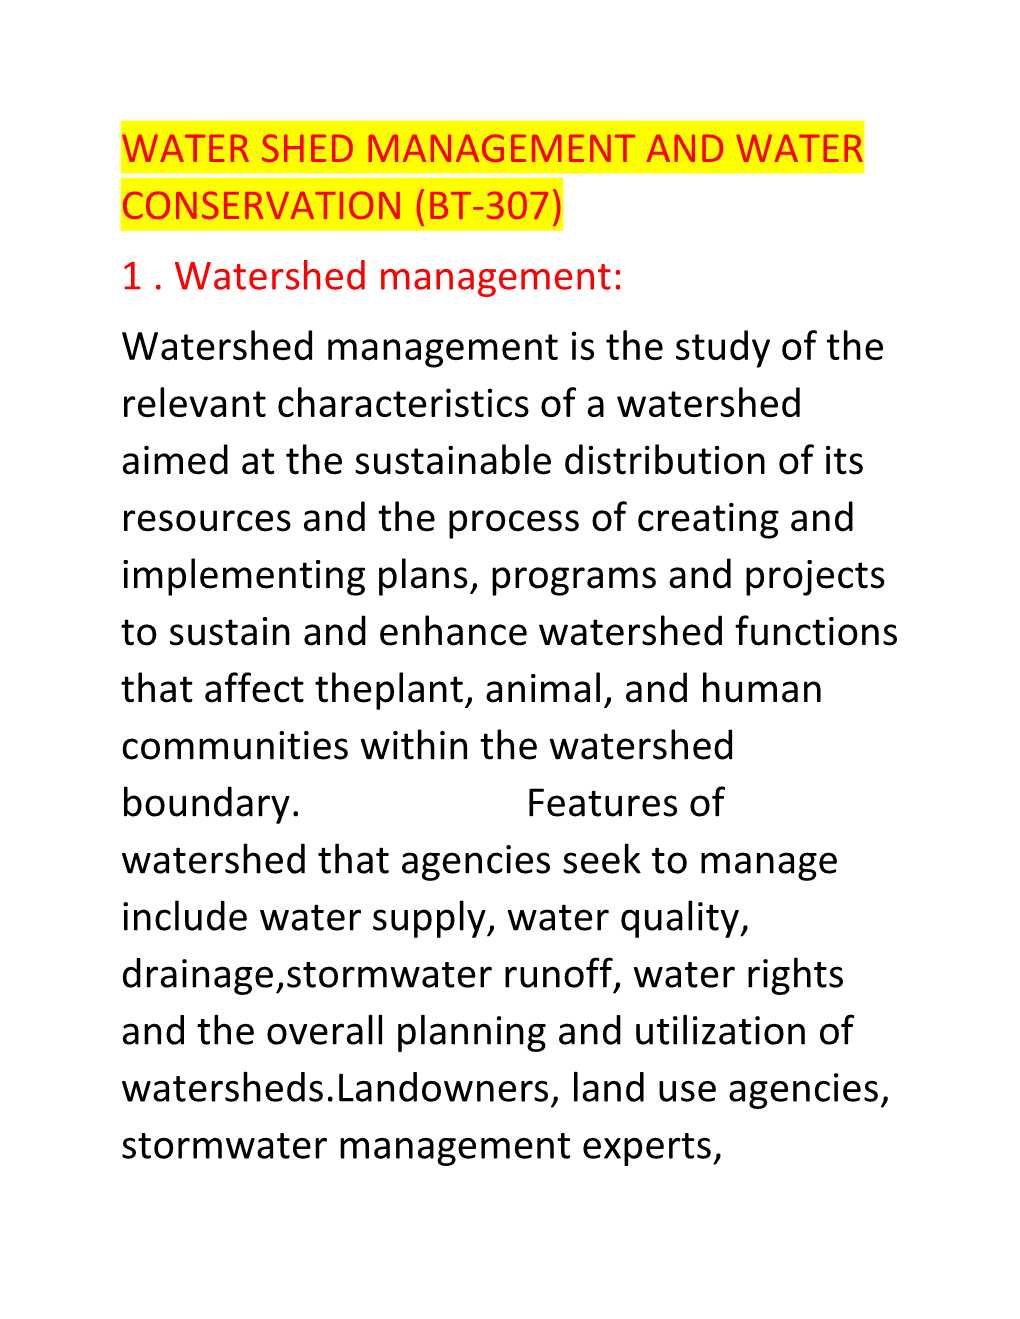 WATER SHED MANAGEMENT and WATER CONSERVATION (BT-307) 1 . Watershed Management: Watershed Management Is the Study of the Releva